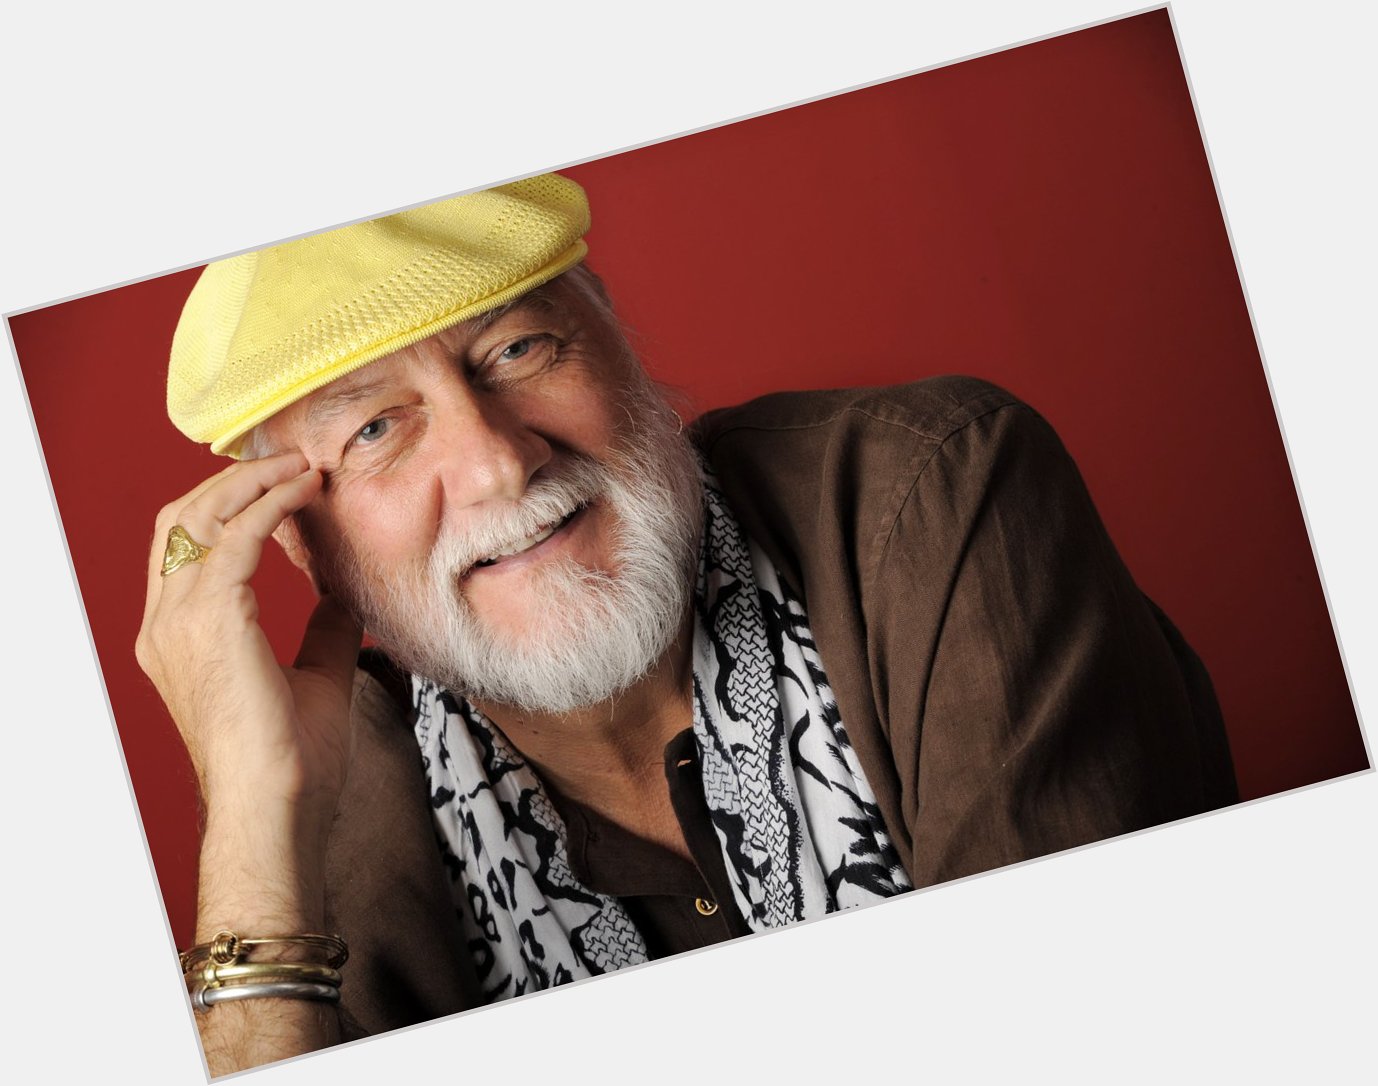 Happy Birthday to Fleetwood Mac co-founder Mick Fleetwood! We hope you have a great 70th birthday 